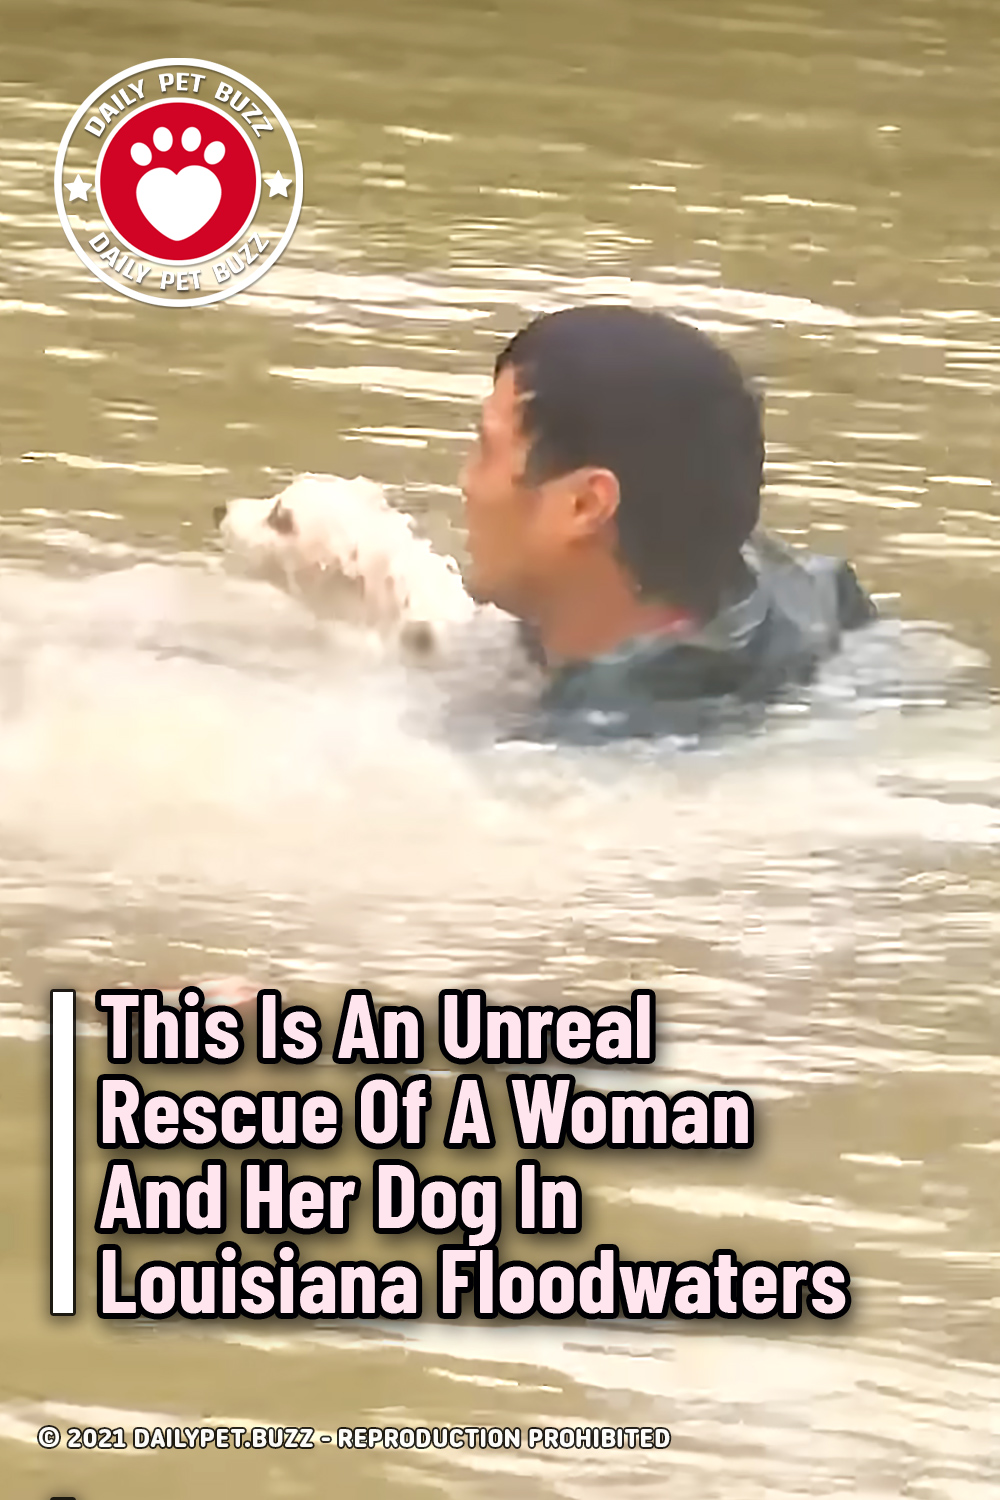 This Is An Unreal Rescue Of A Woman And Her Dog In Louisiana Floodwaters